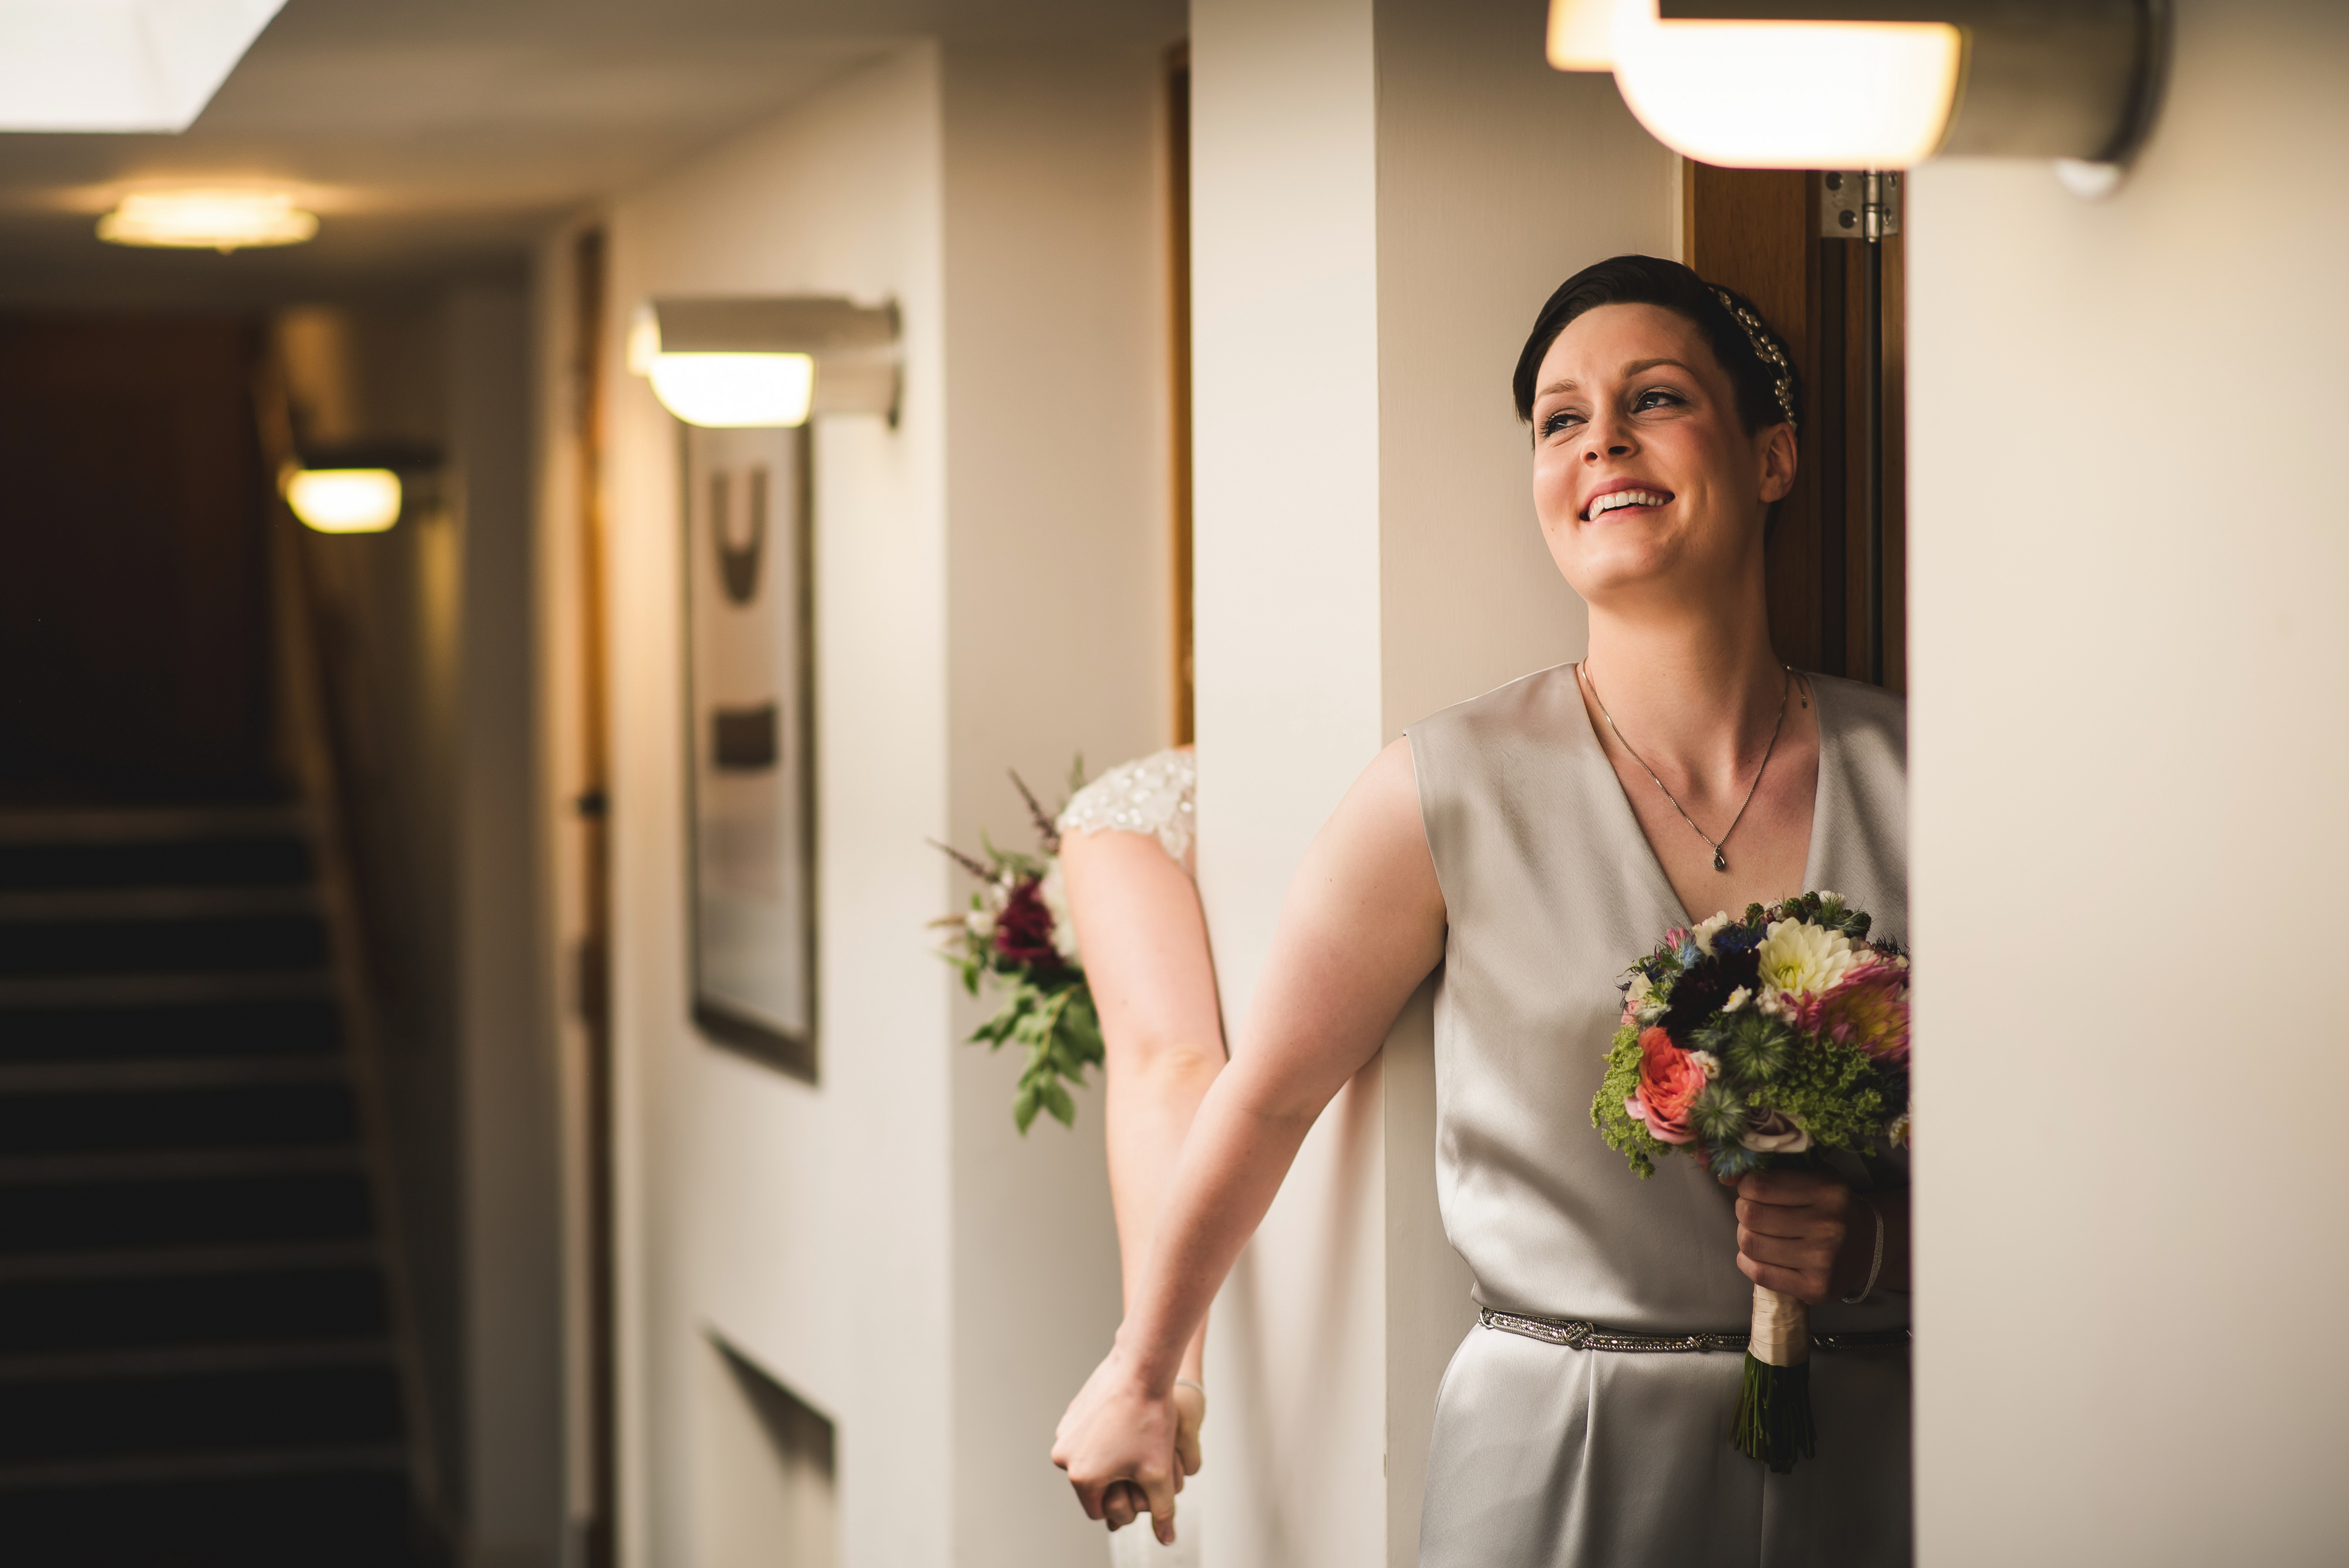 Modern DIY Wedding at Theobolds Estate with A Dress A Jumpsuit and Lots of Personal Touches